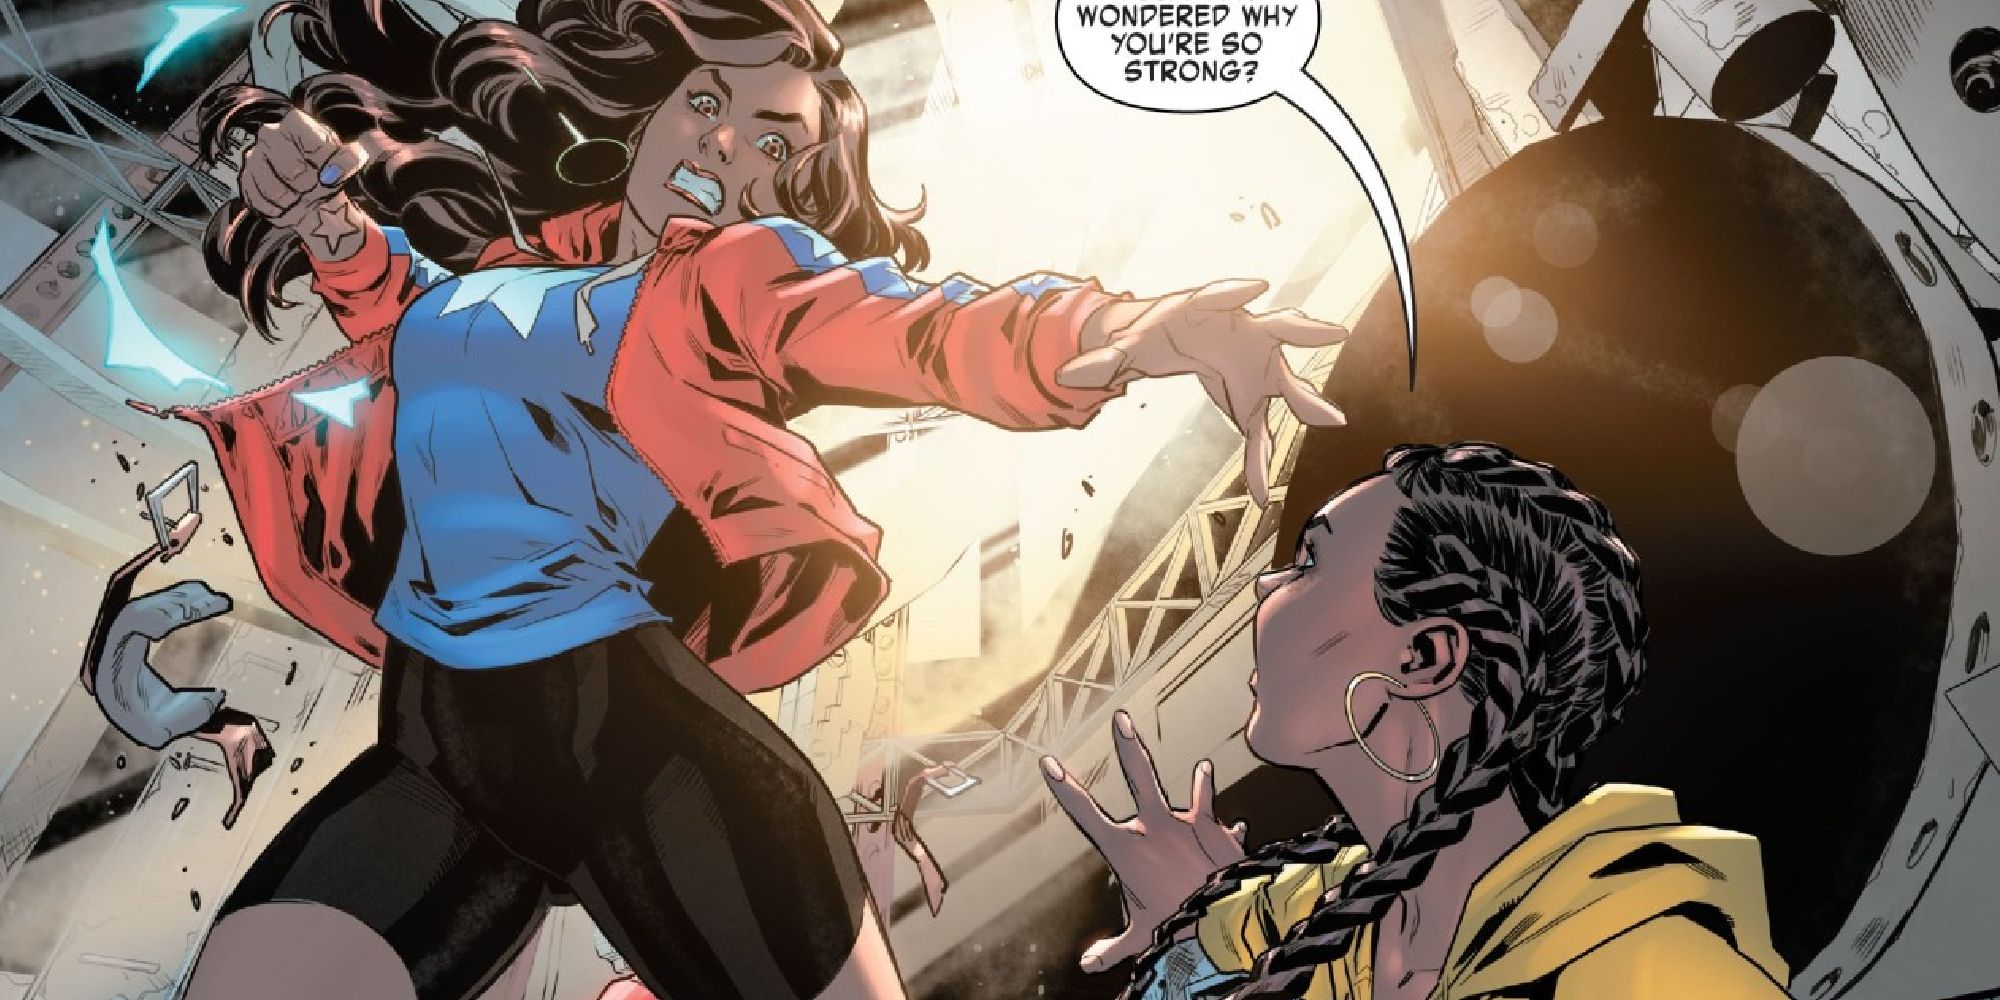 America raising her fist towards her sister Catalina in the comics